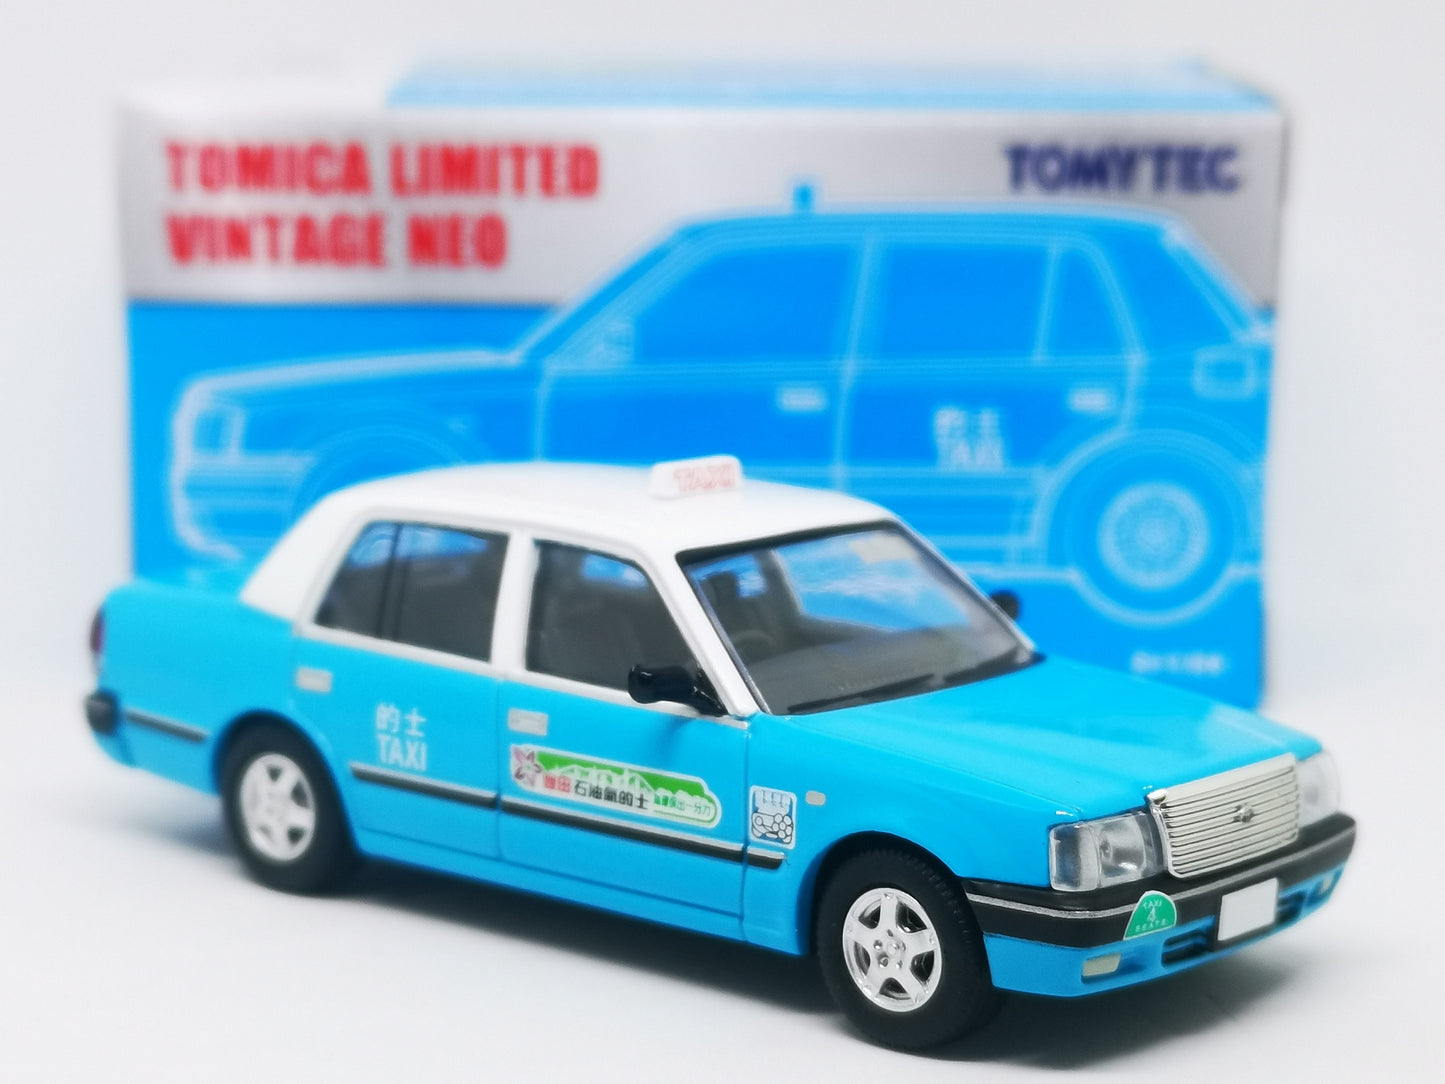 Tomica Limited Vintage Neo Hong Kong Exclusive Toyota Crown Comfort Hong Kong Taxi